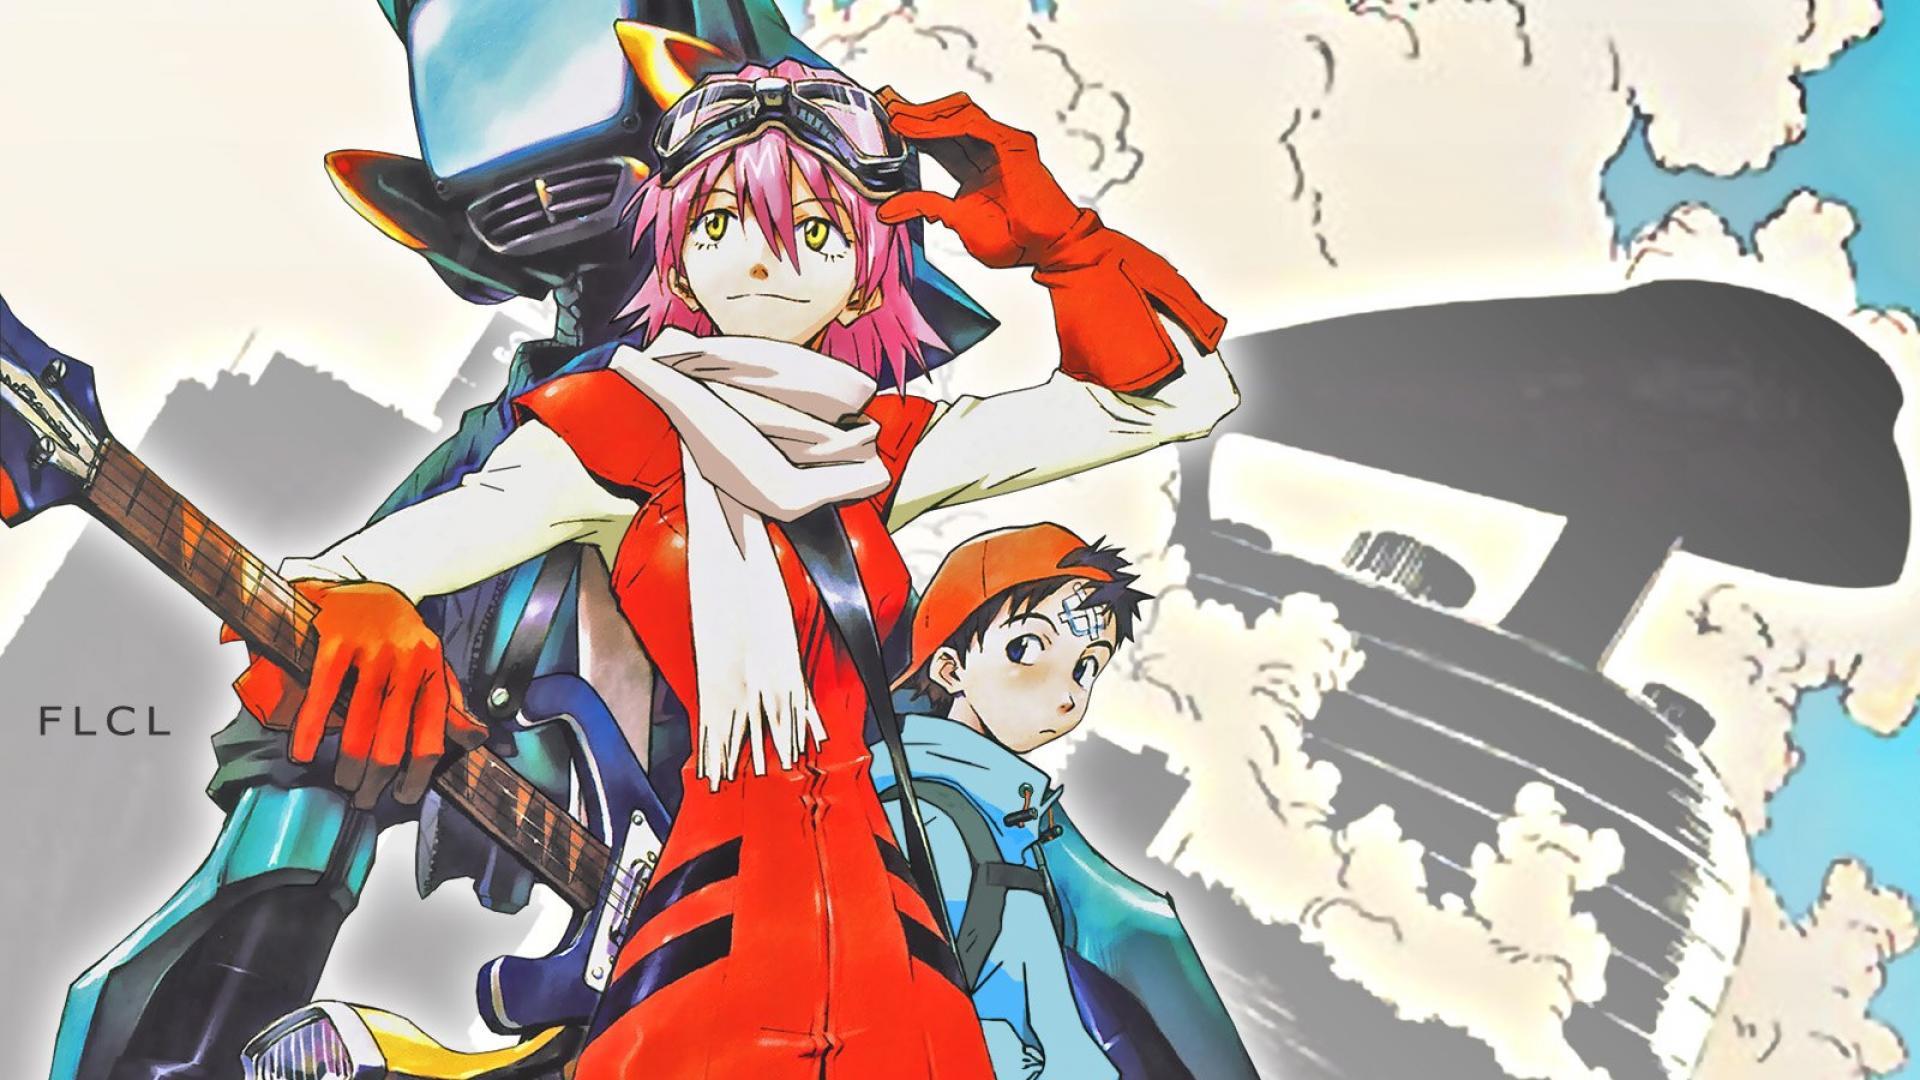 Flcl Alternative Wallpapers High Quality.